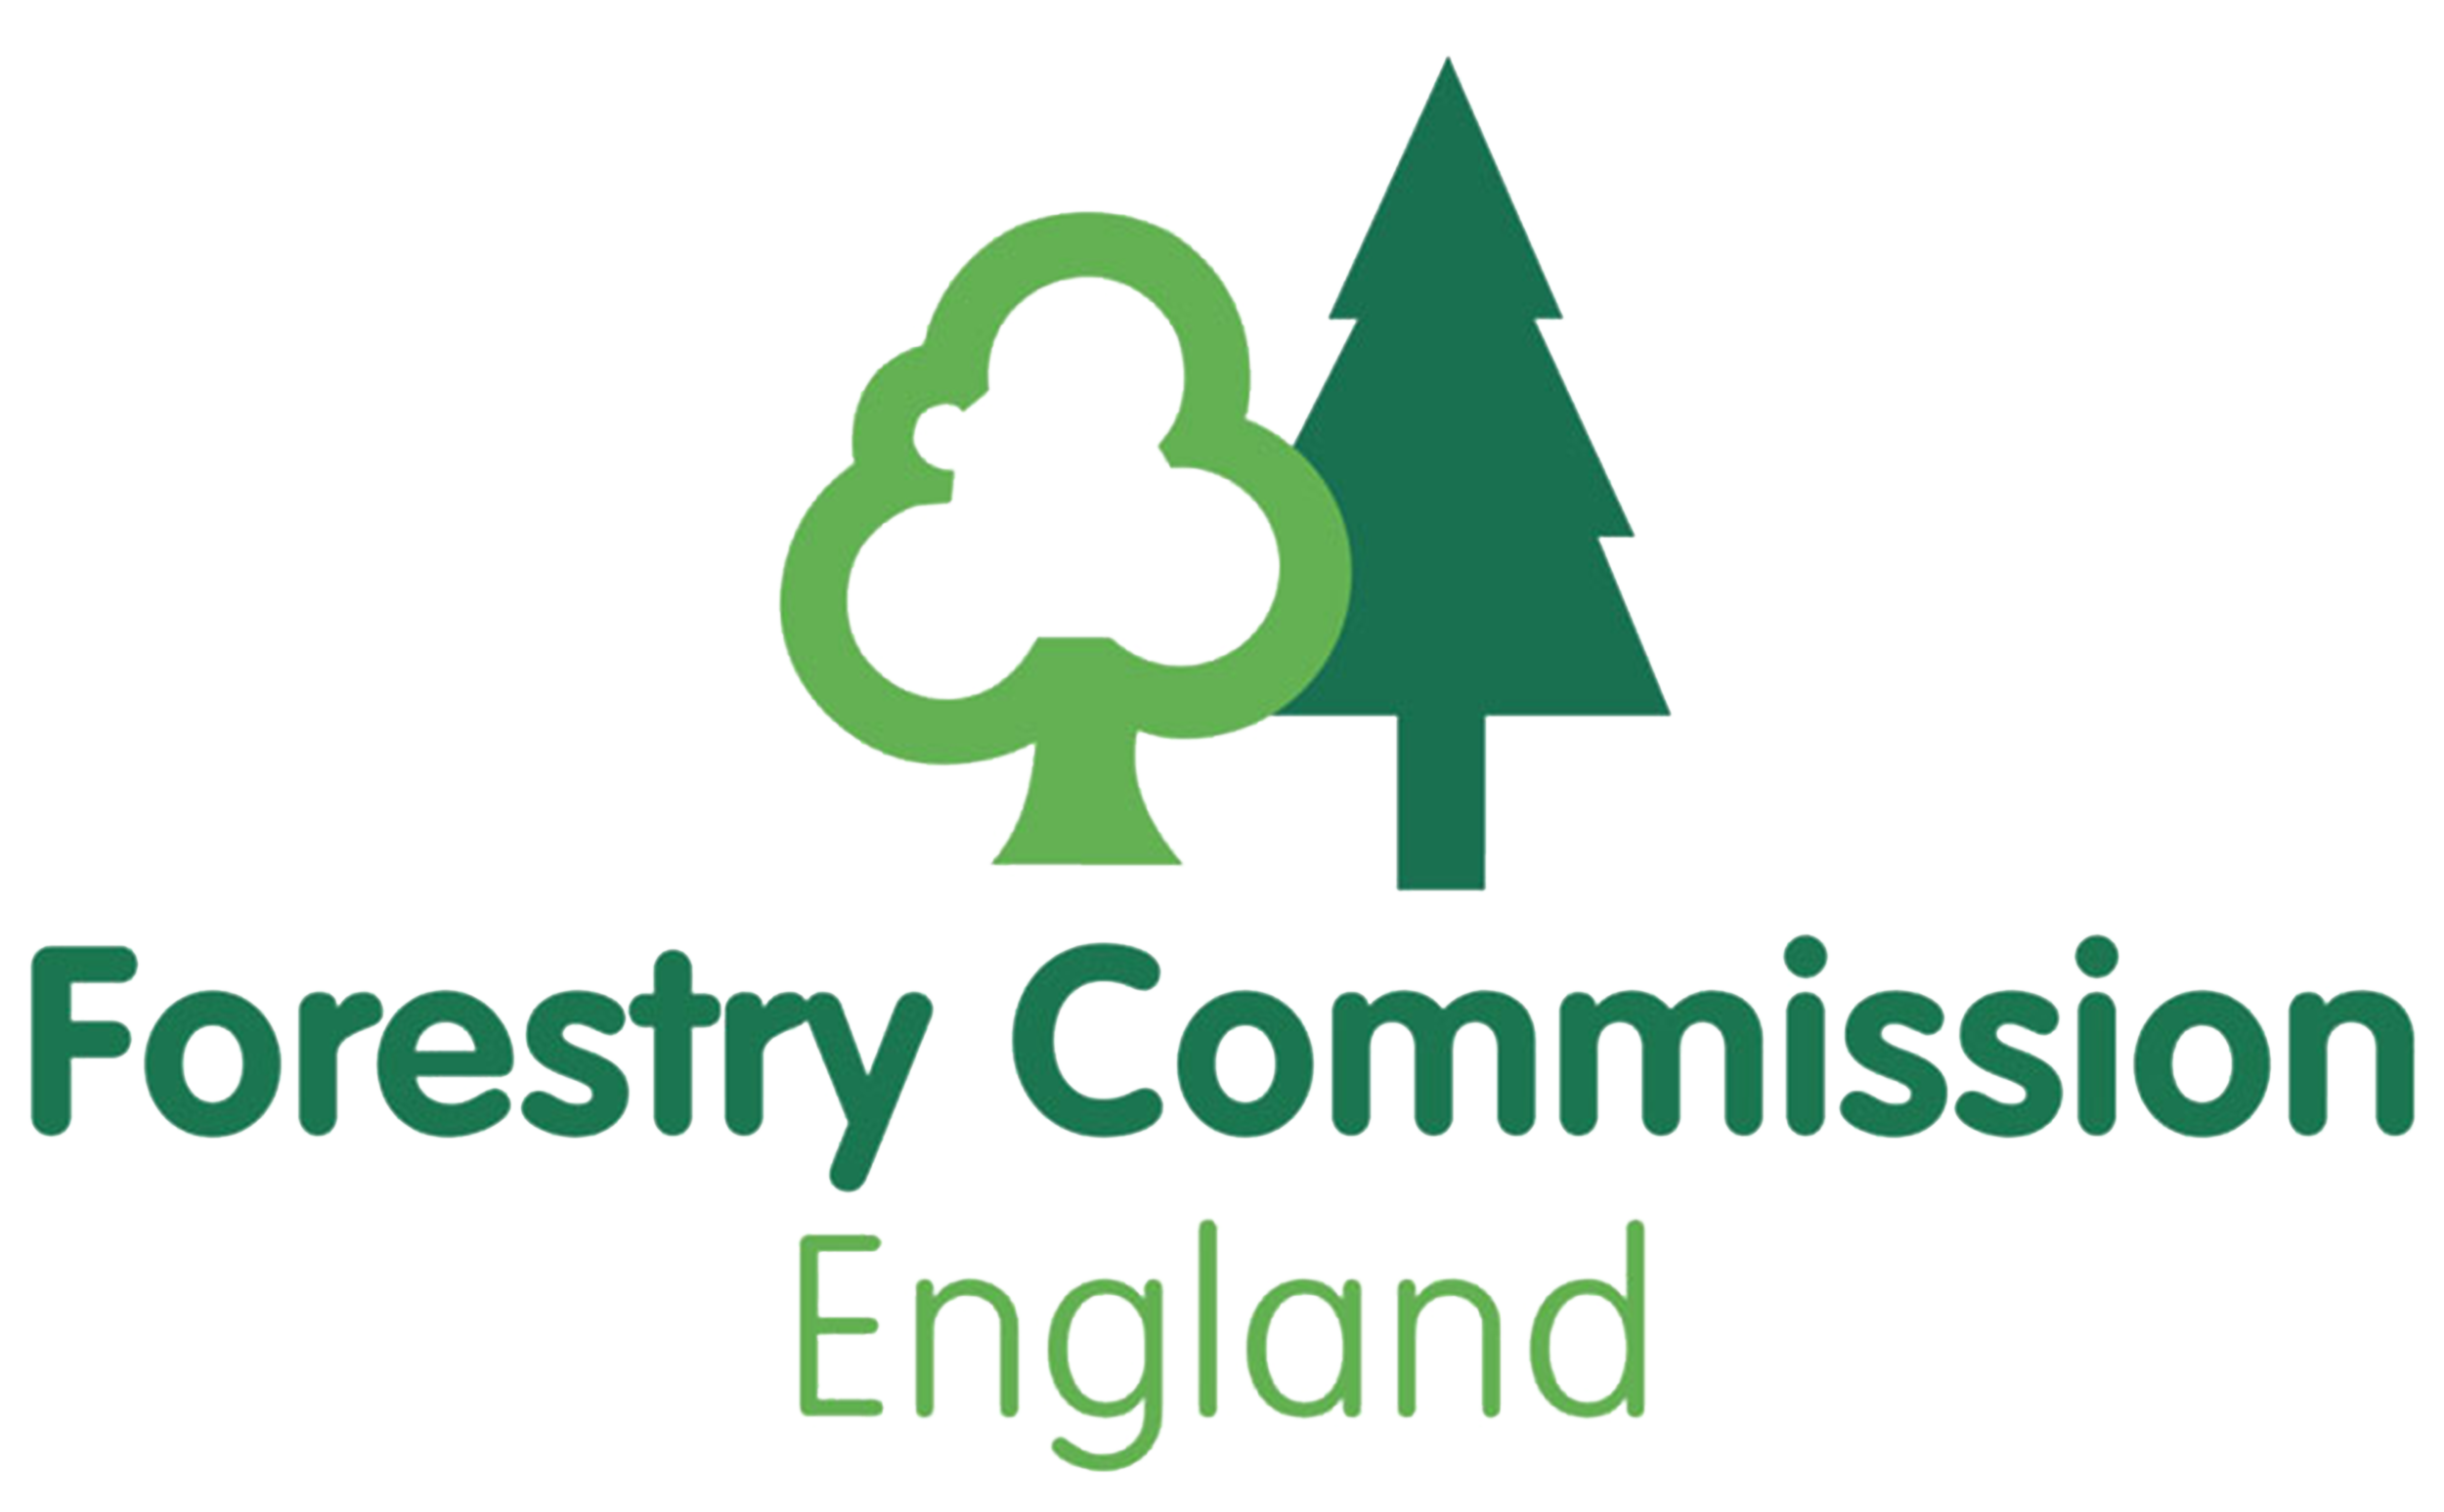 Forestry Commission England logo